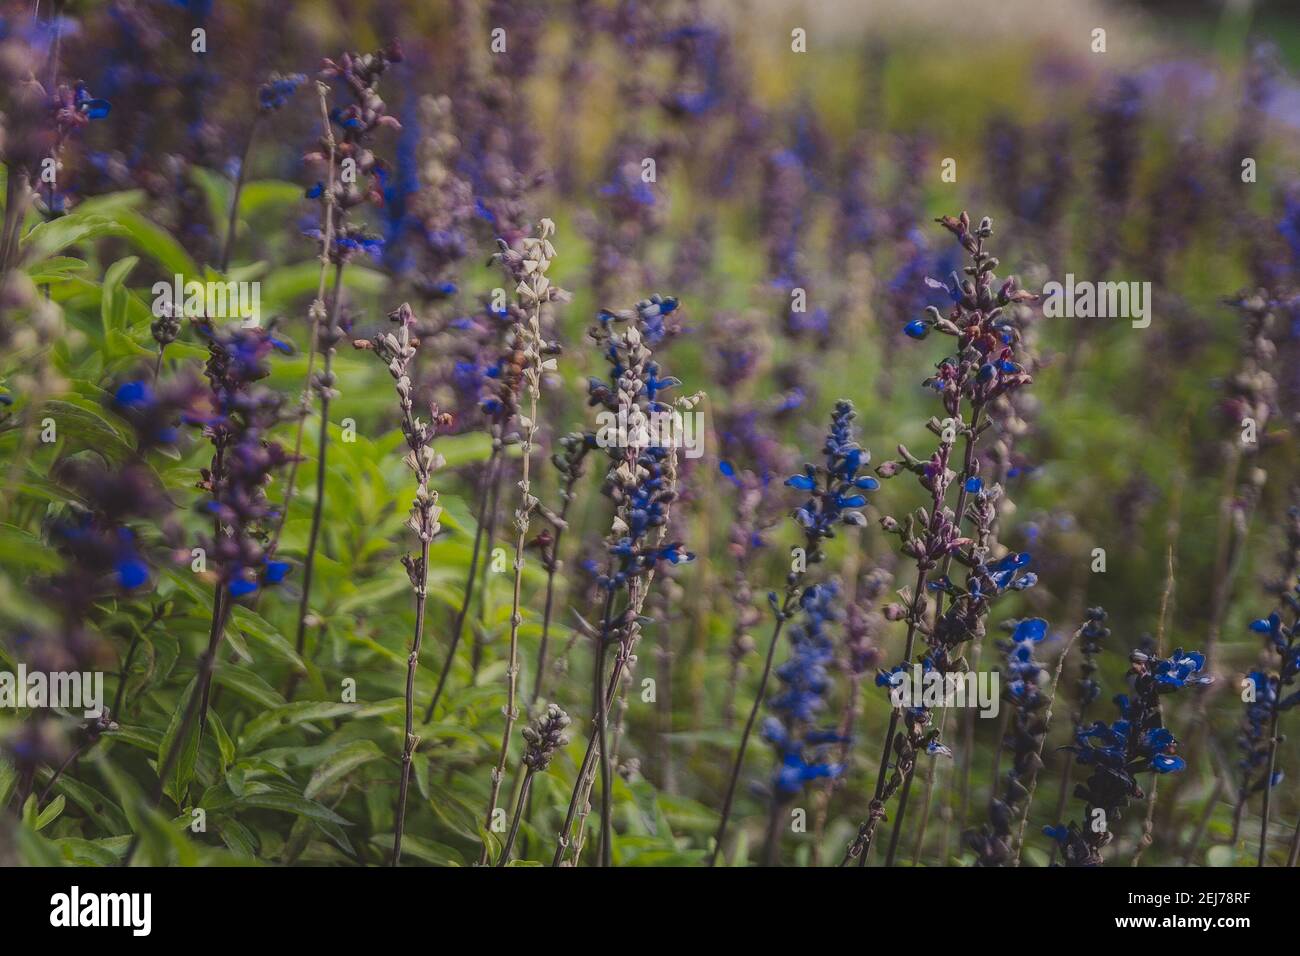 Selective focus of blooming blue and purple flowers Salvia farinacea Benth Stock Photo